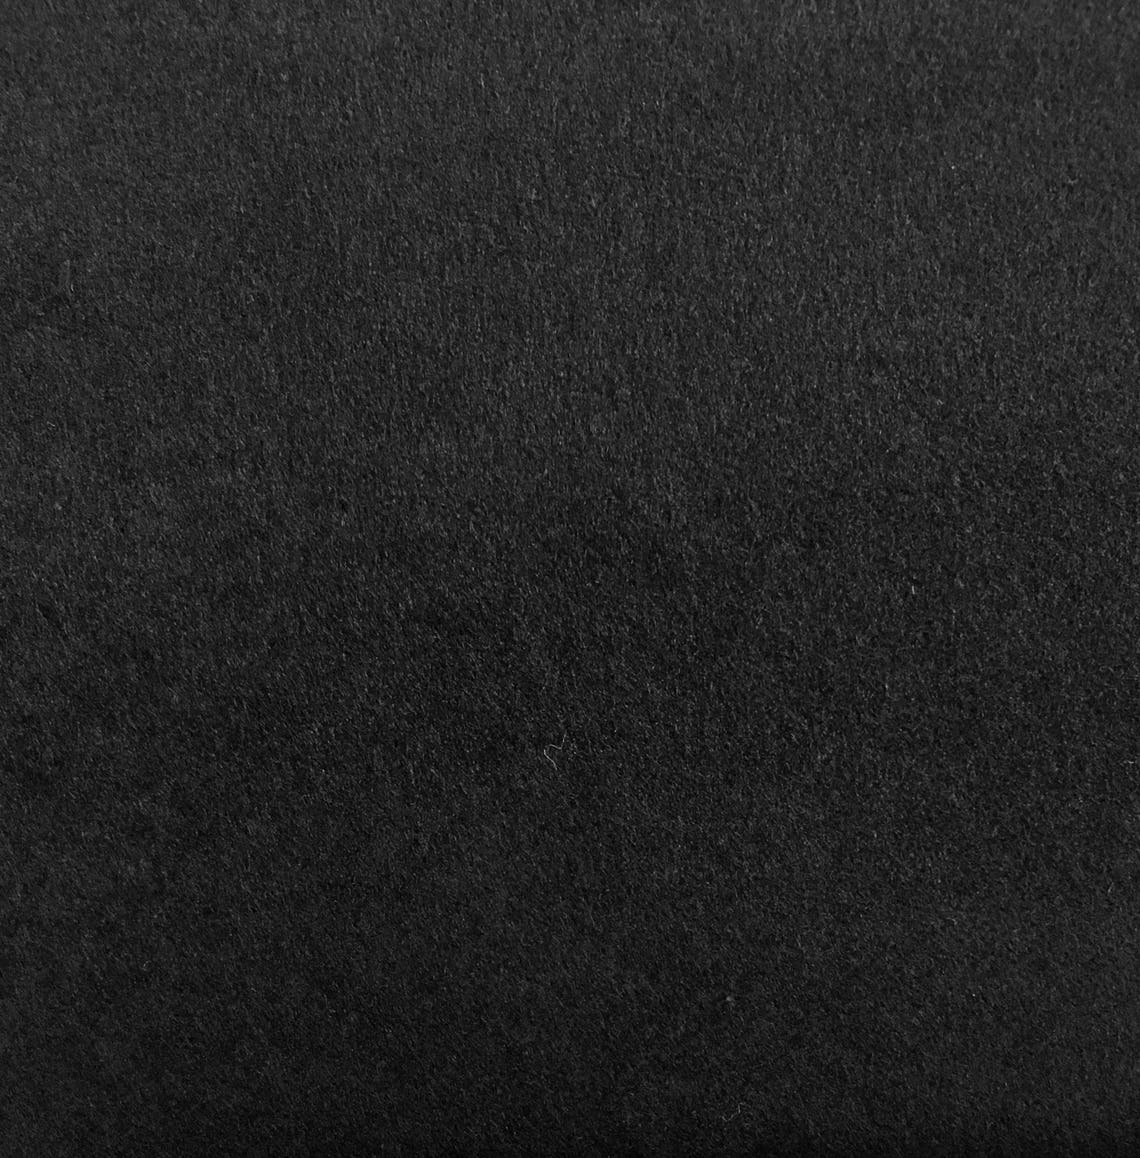 Cotton Moleskin/Fustian Black Colour fabric sold by the | Etsy